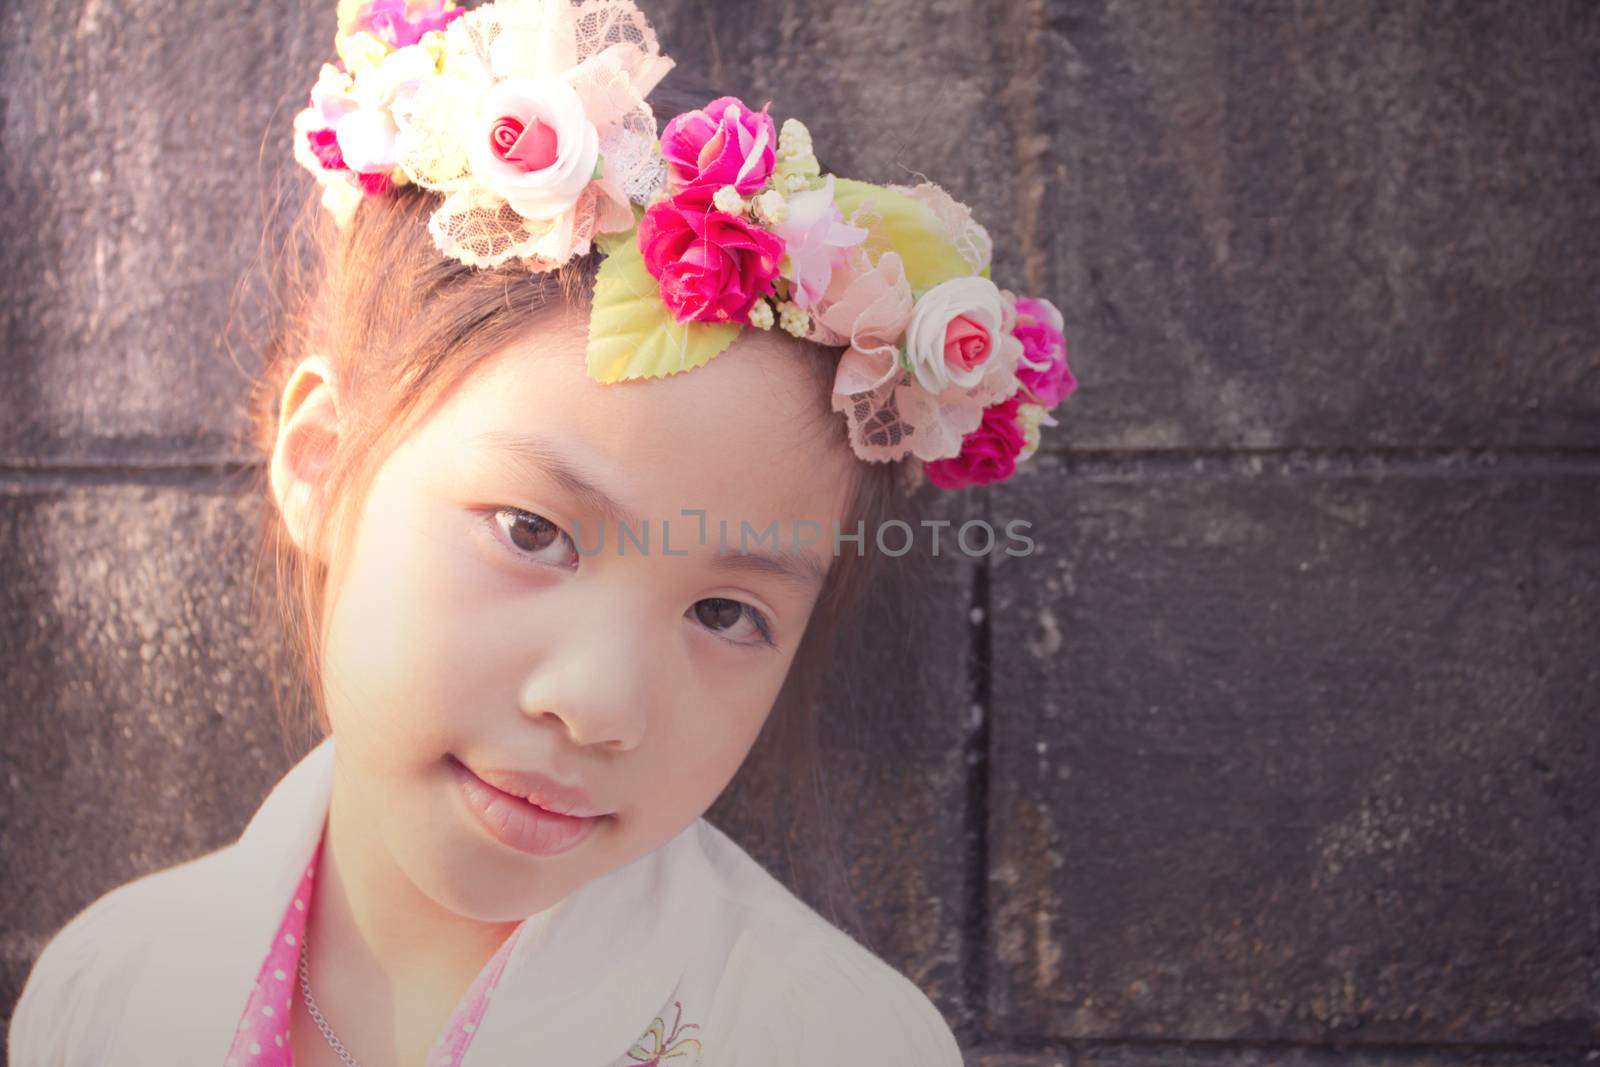 Lovely little girl with flowers on the head by wyoosumran